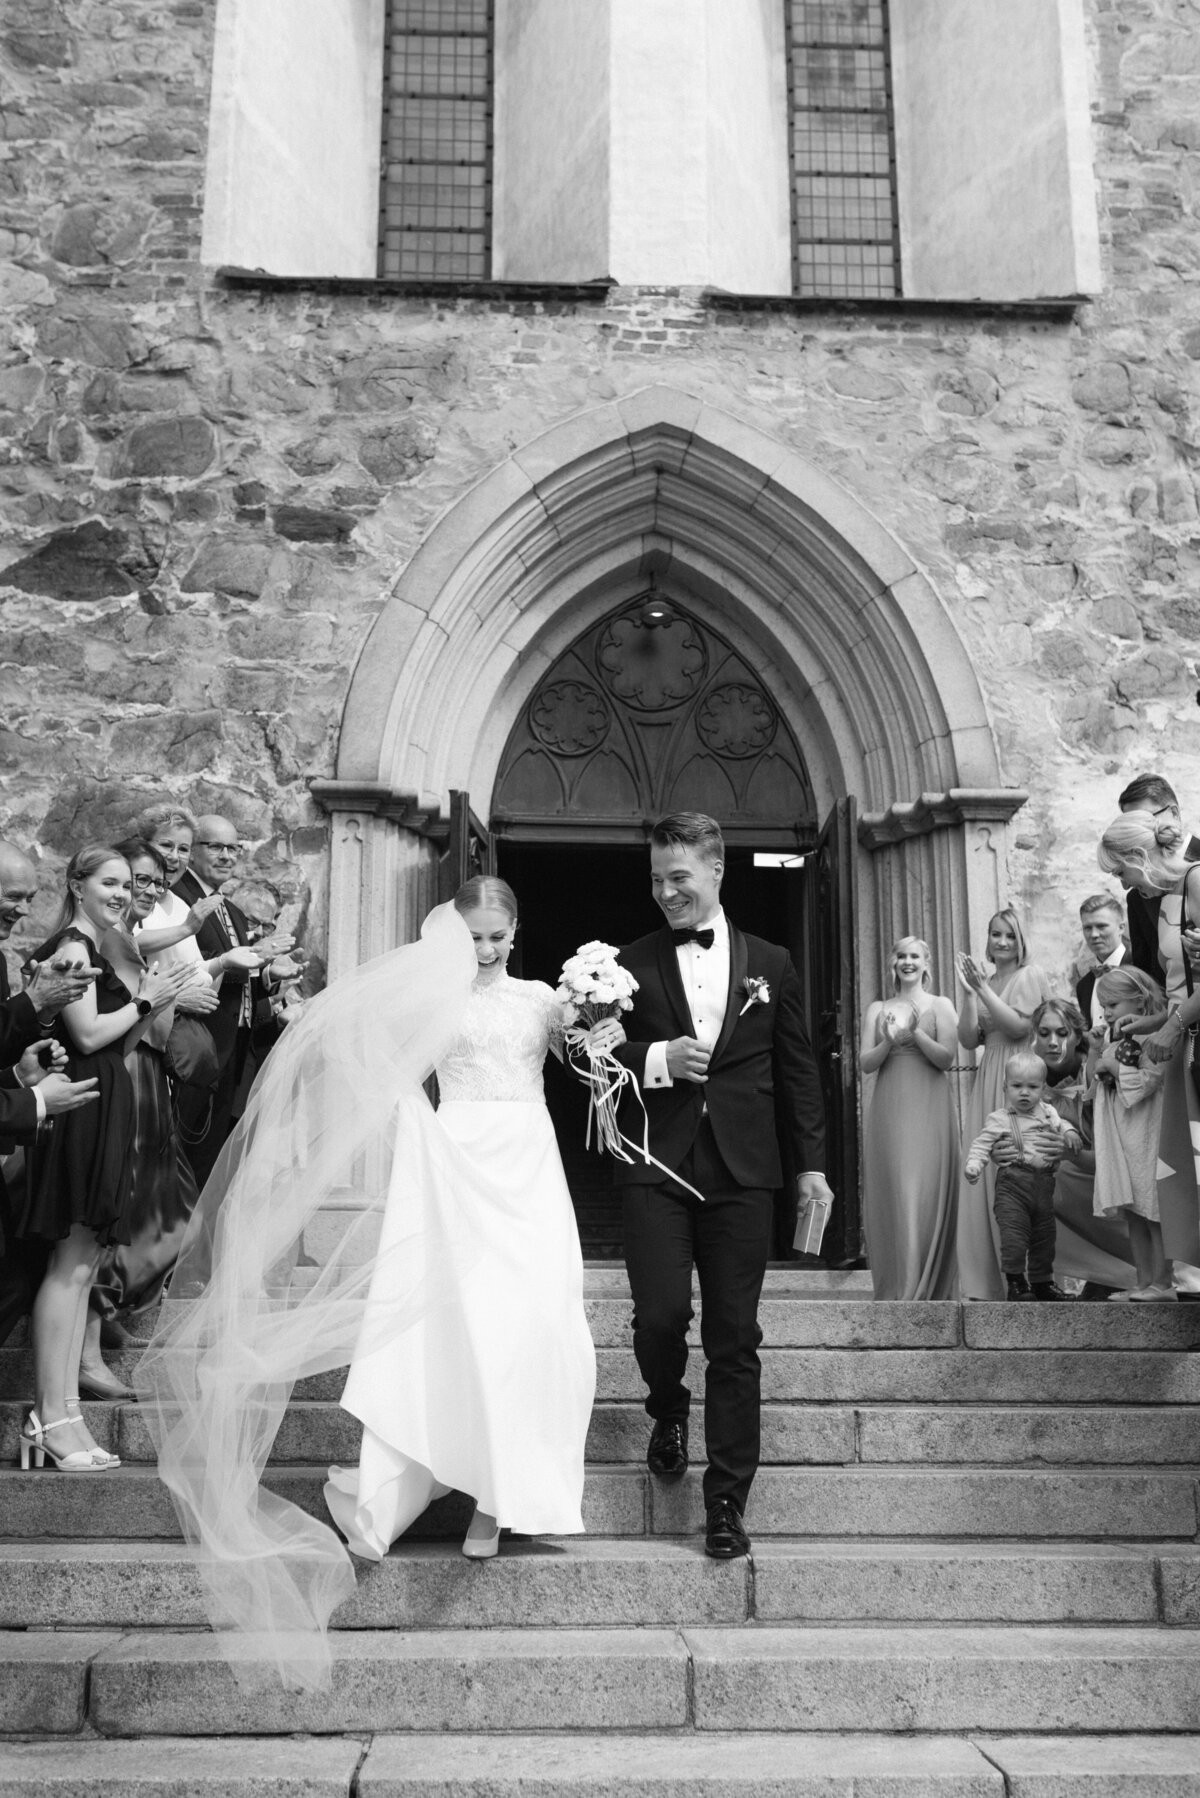 Wedding couple walking down the stairs of Turku cathedral after ceremony. Guests are cheering. Documentary wedding photography by photographer Hannika Gabrielsson.